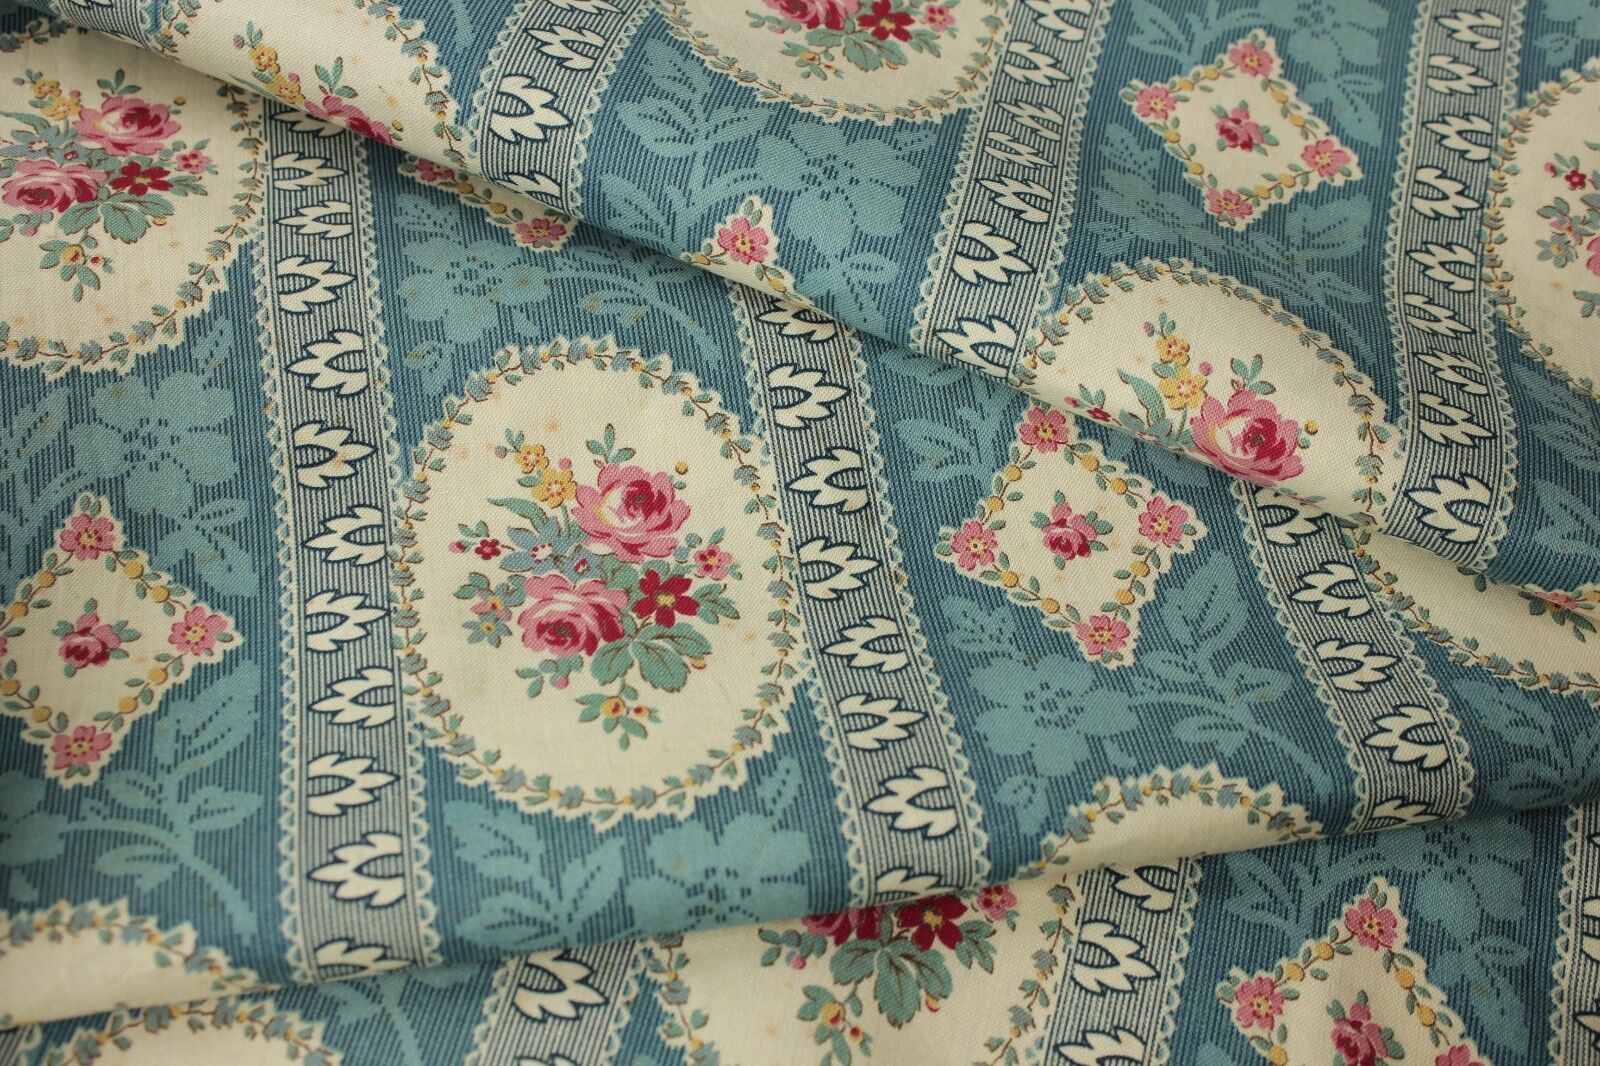 Antique French UNUSED fabric floral stripe c 1900 material blue rose printed old